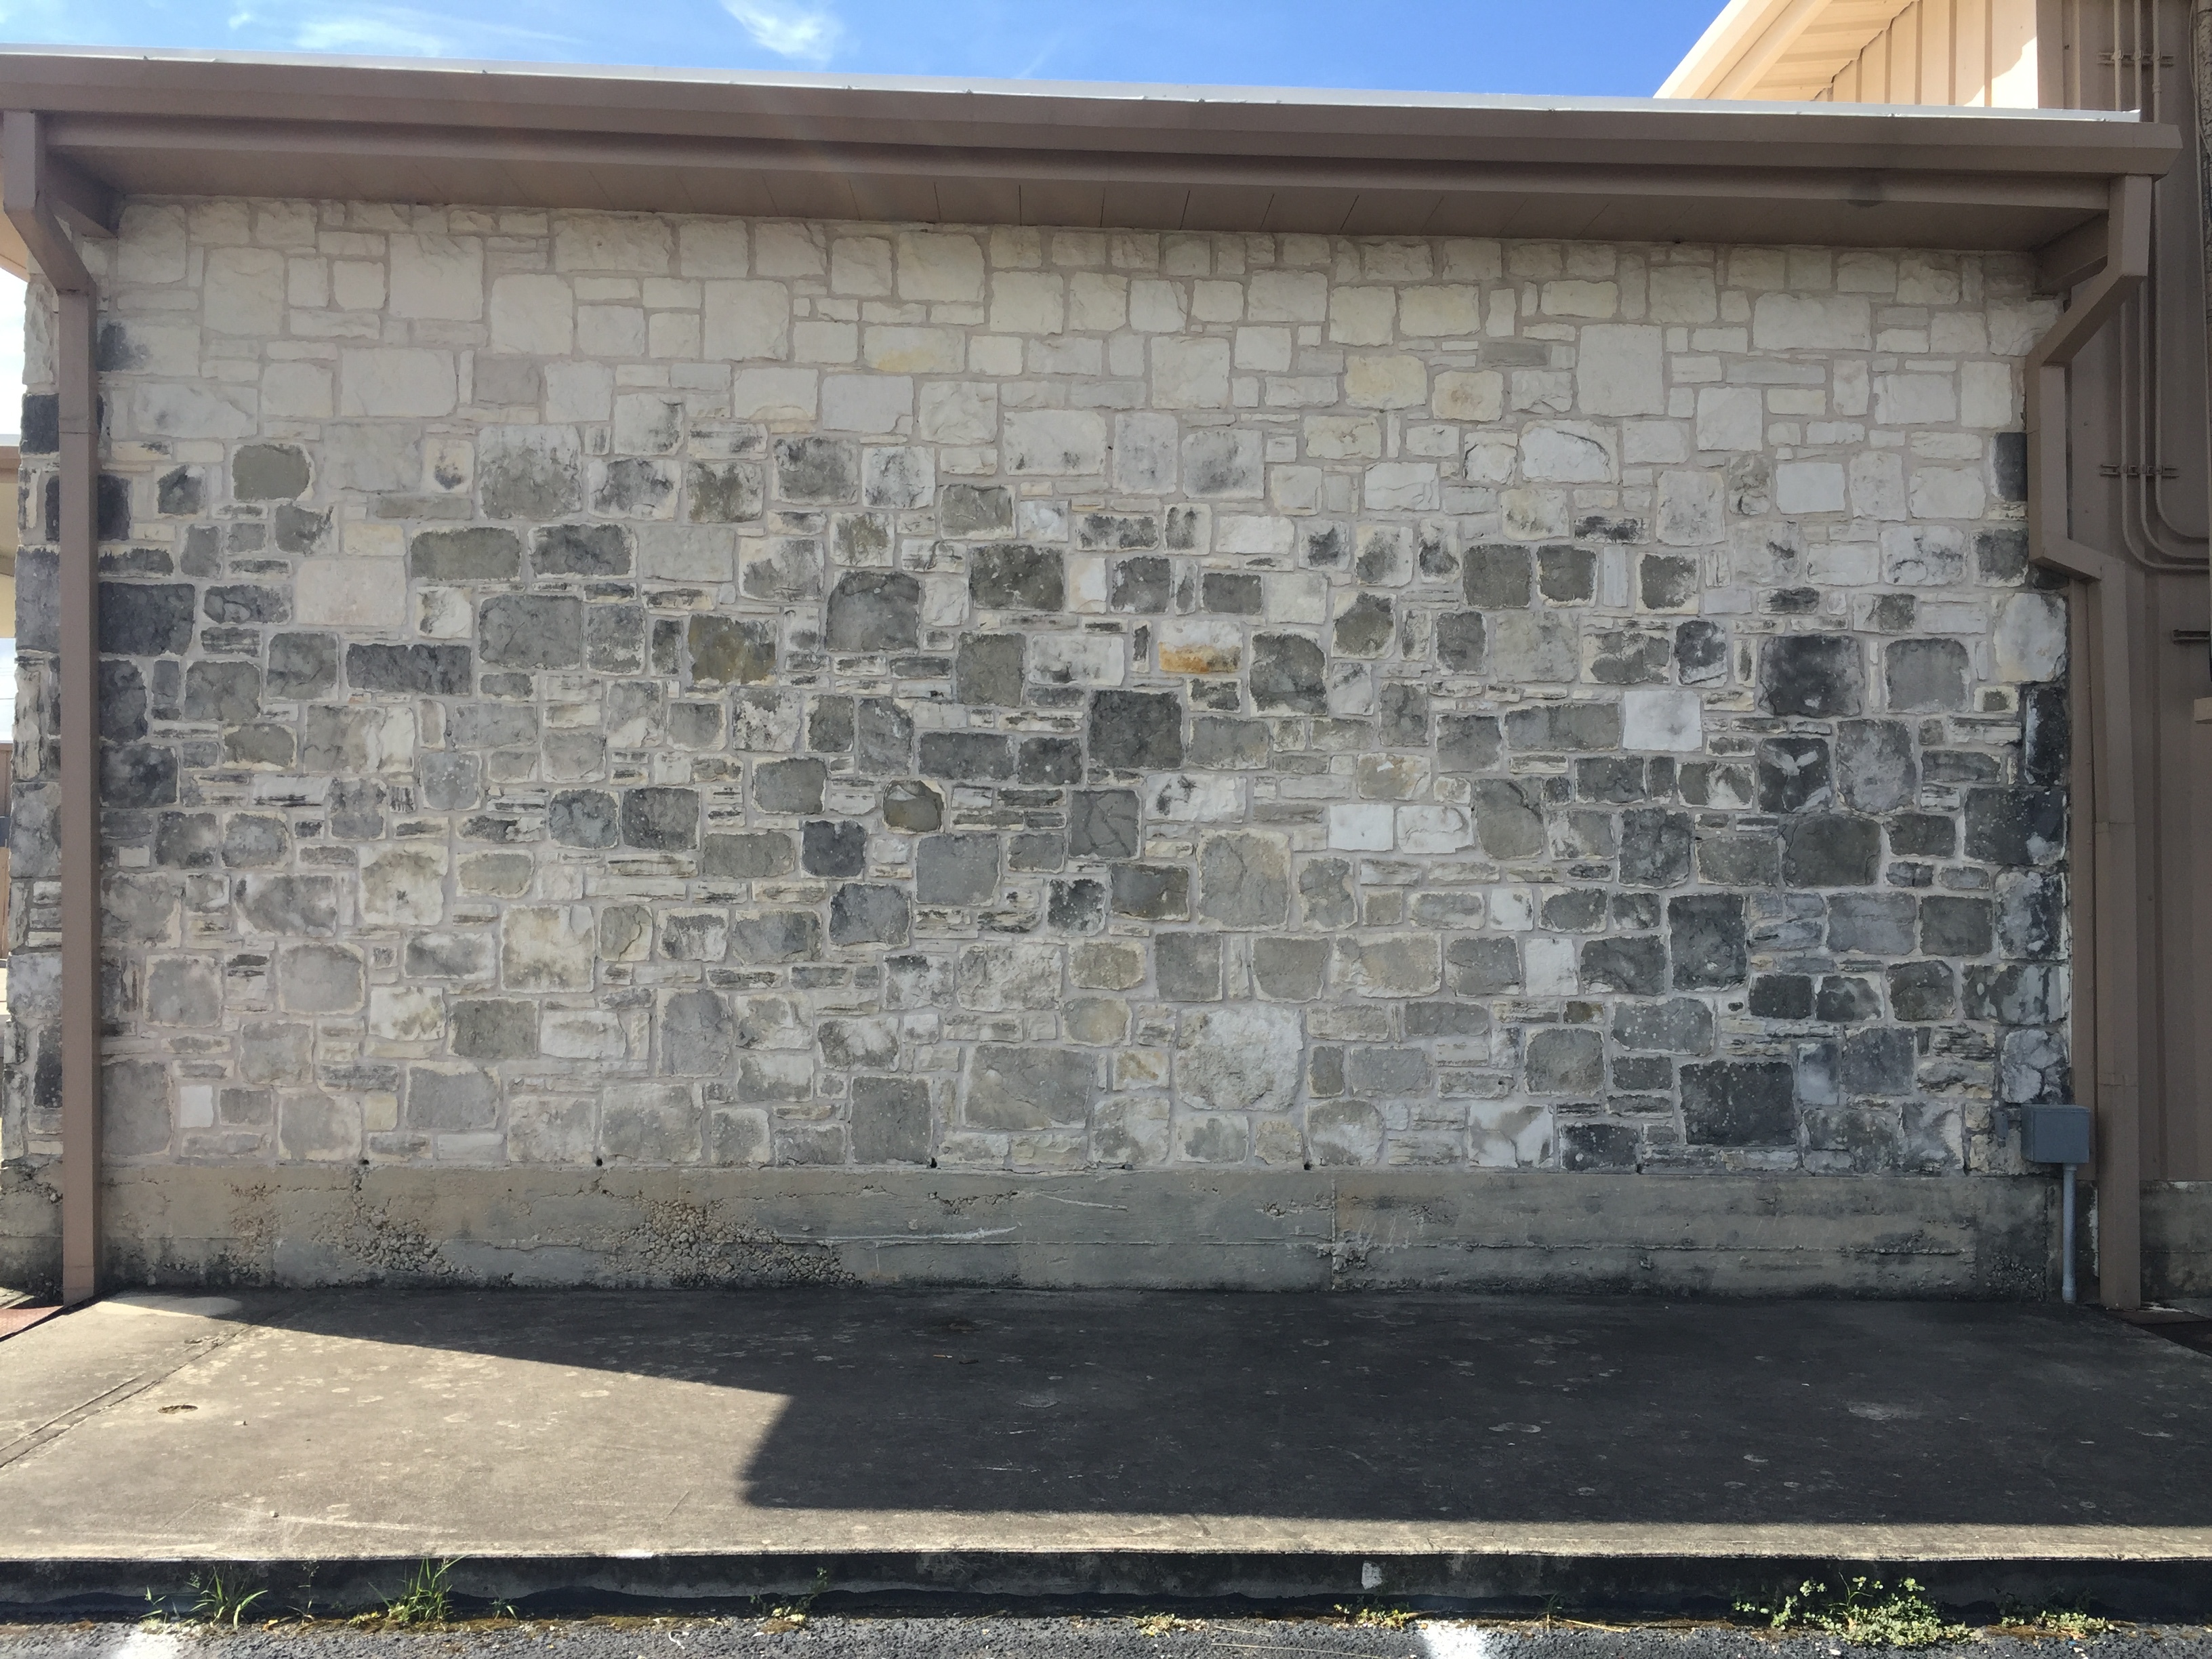 Black stains on limestone columns, pedestals- how to clean